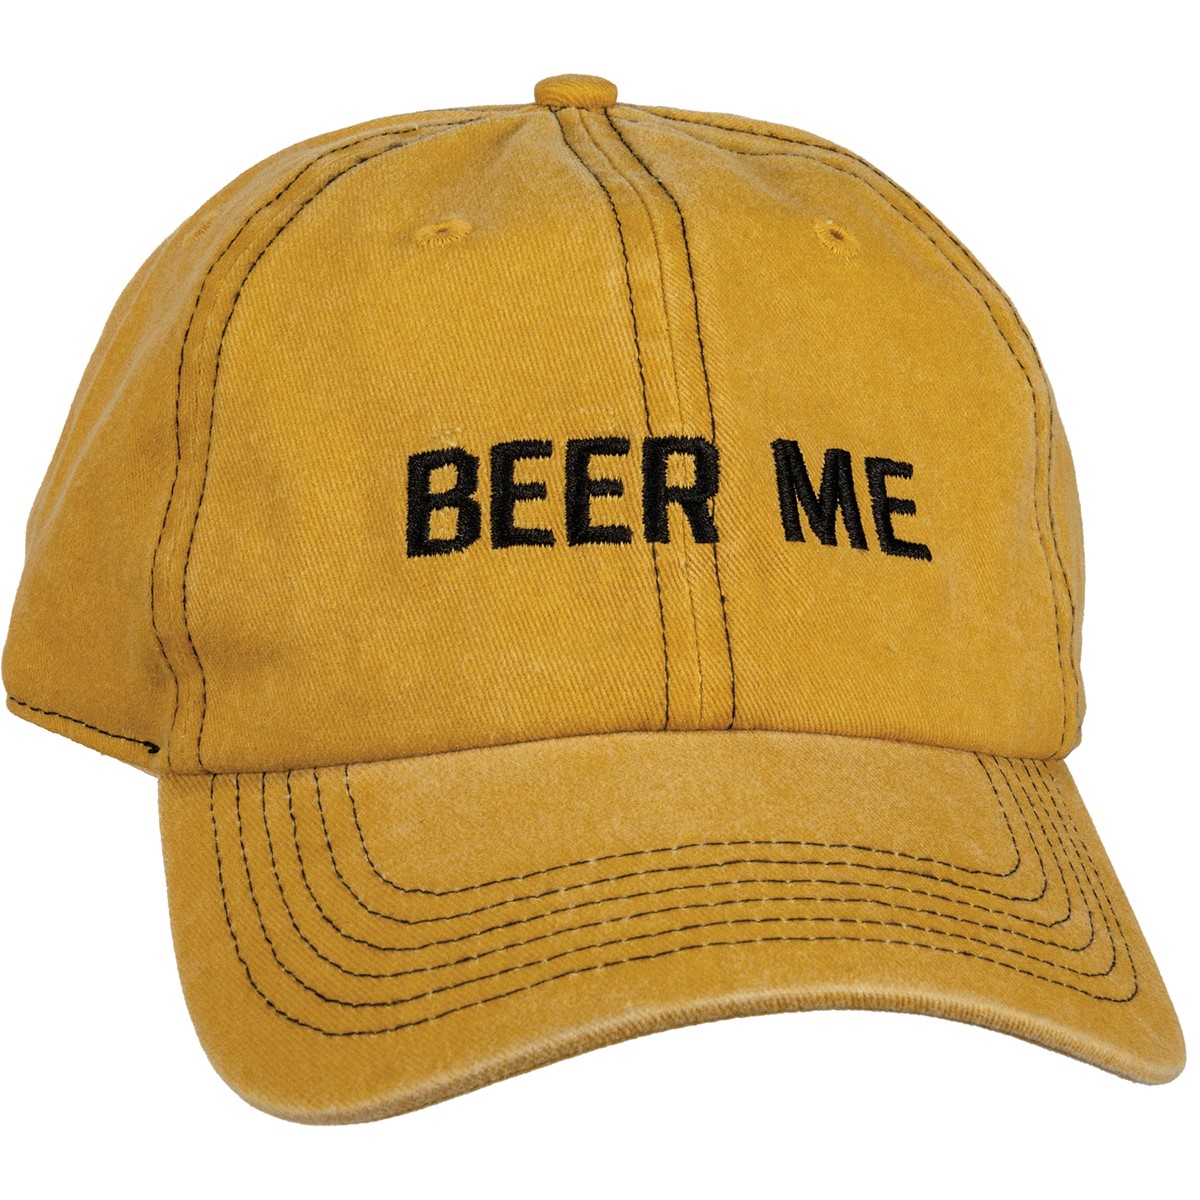 Baseball Cap - Beer Me - One Size Fits Most - Cotton, Metal